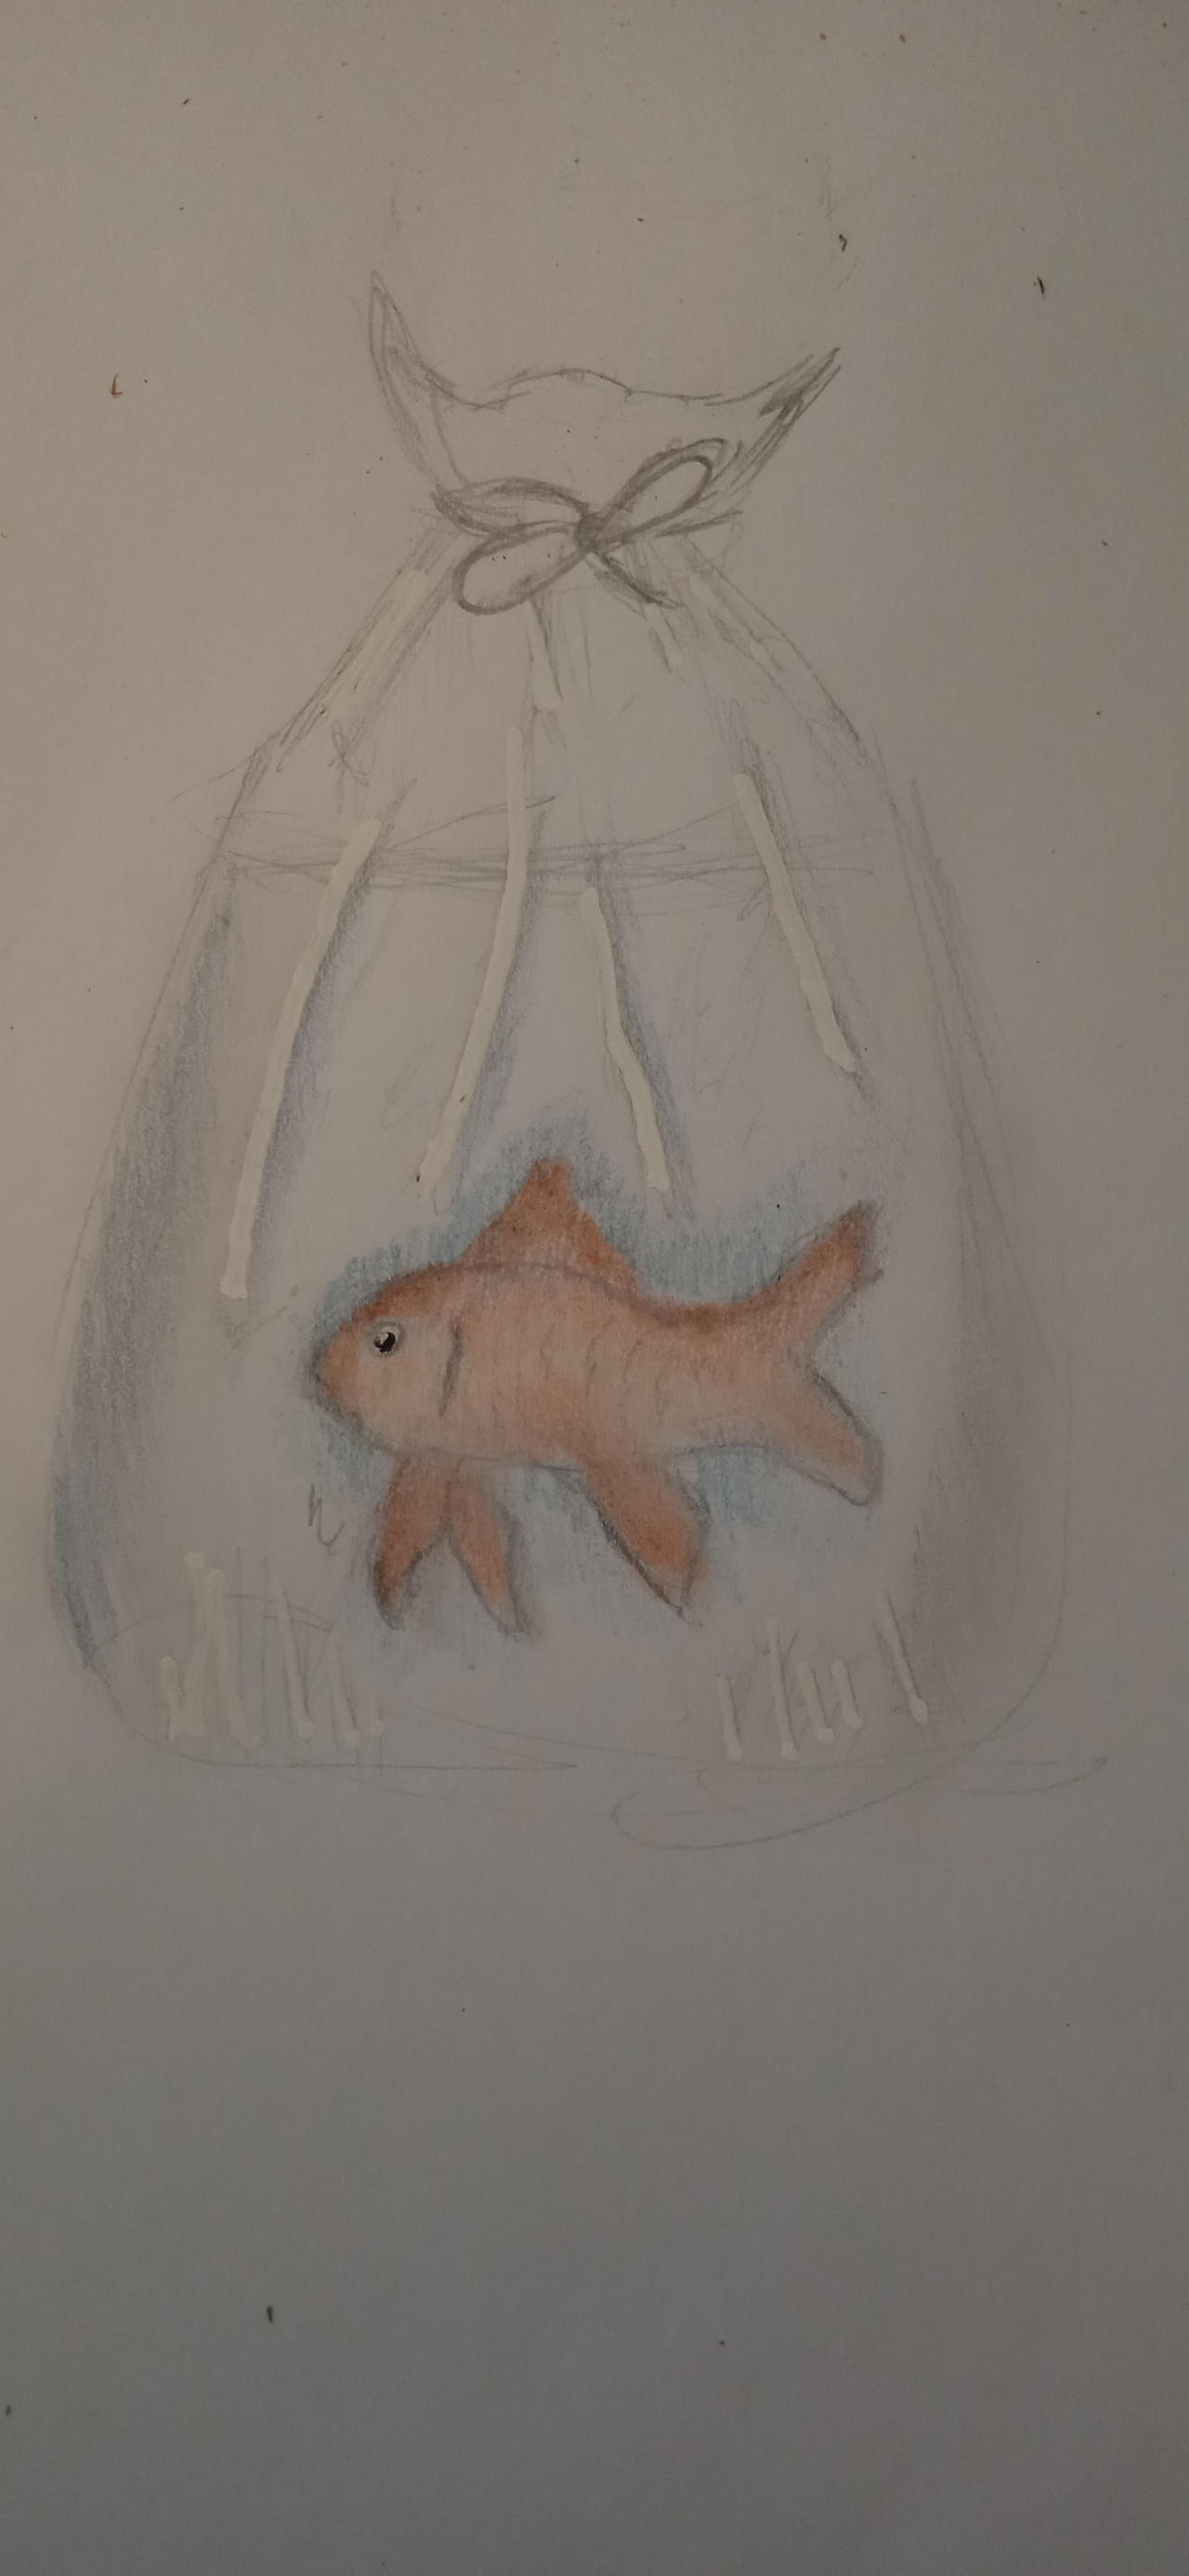 Fish in plastic bag :) by 20minds on DeviantArt